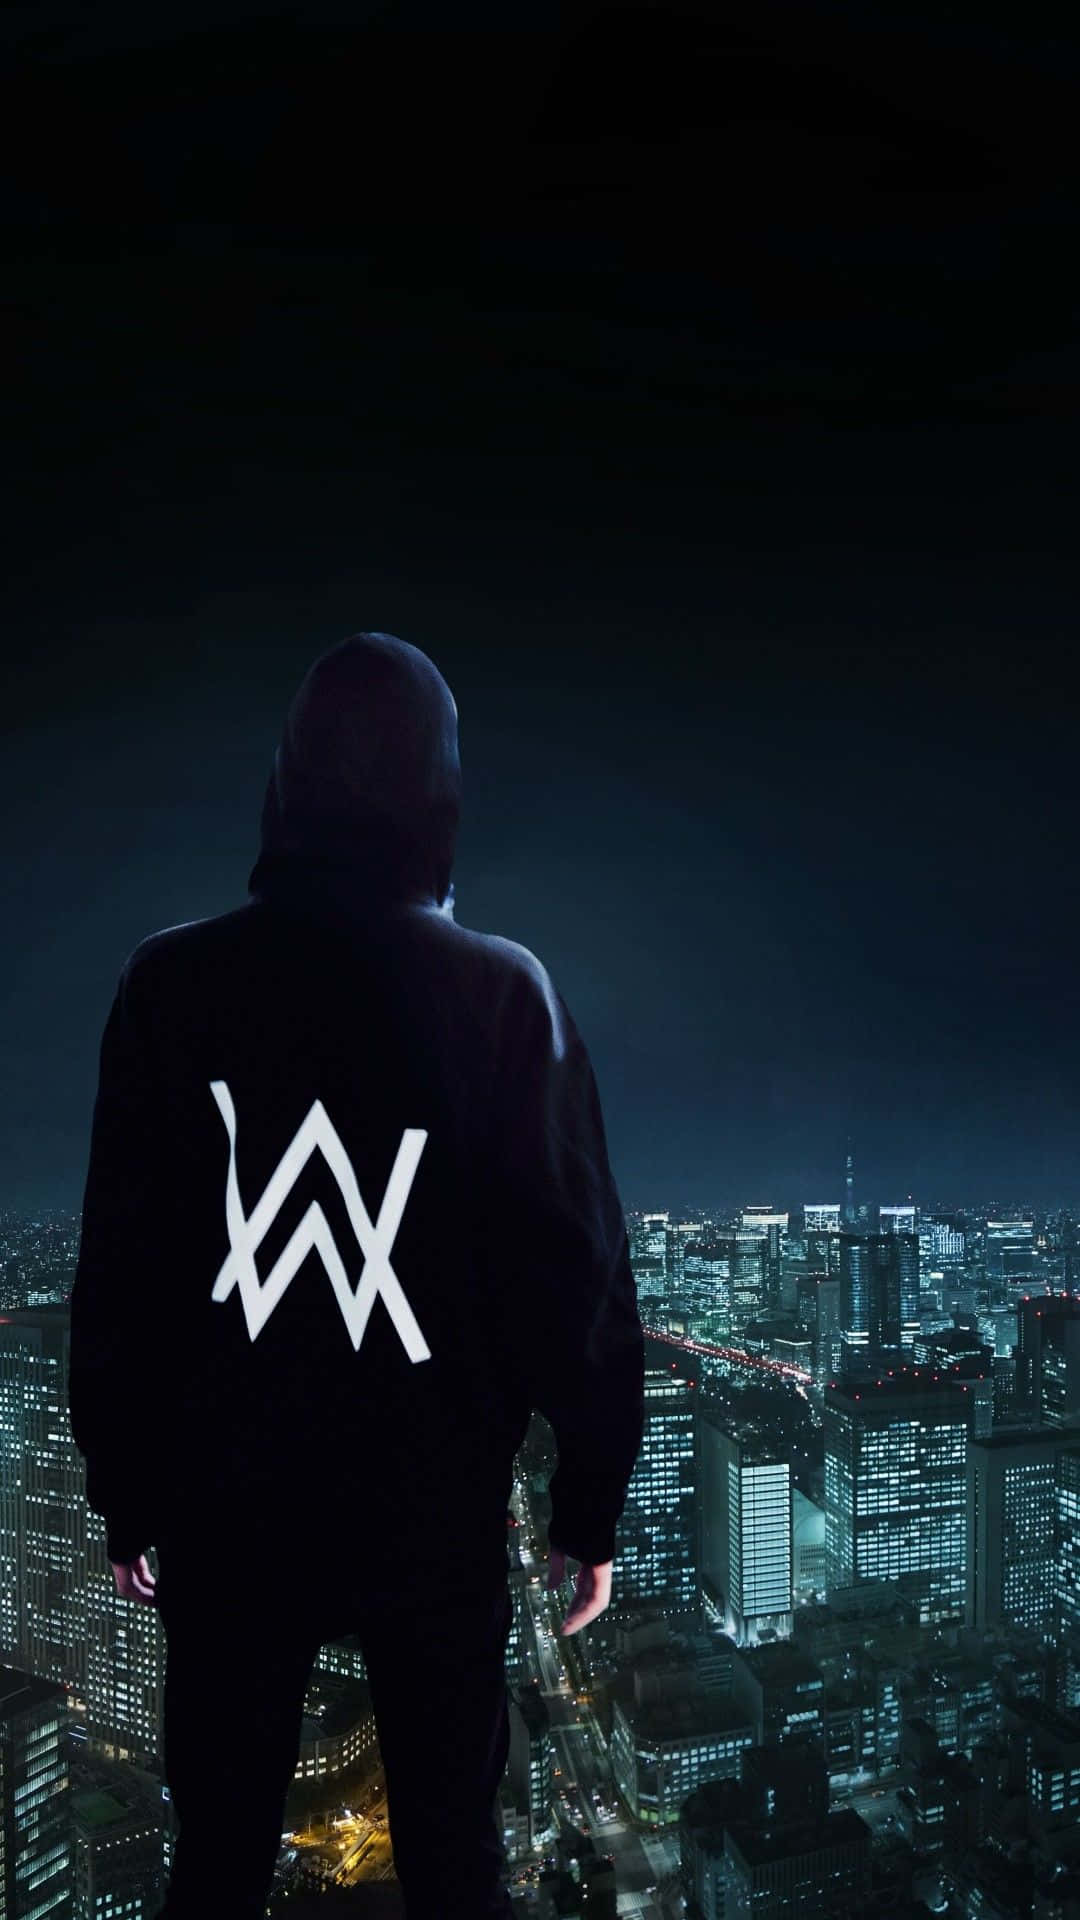 Alan Walker in concert with vibrant lights and visuals